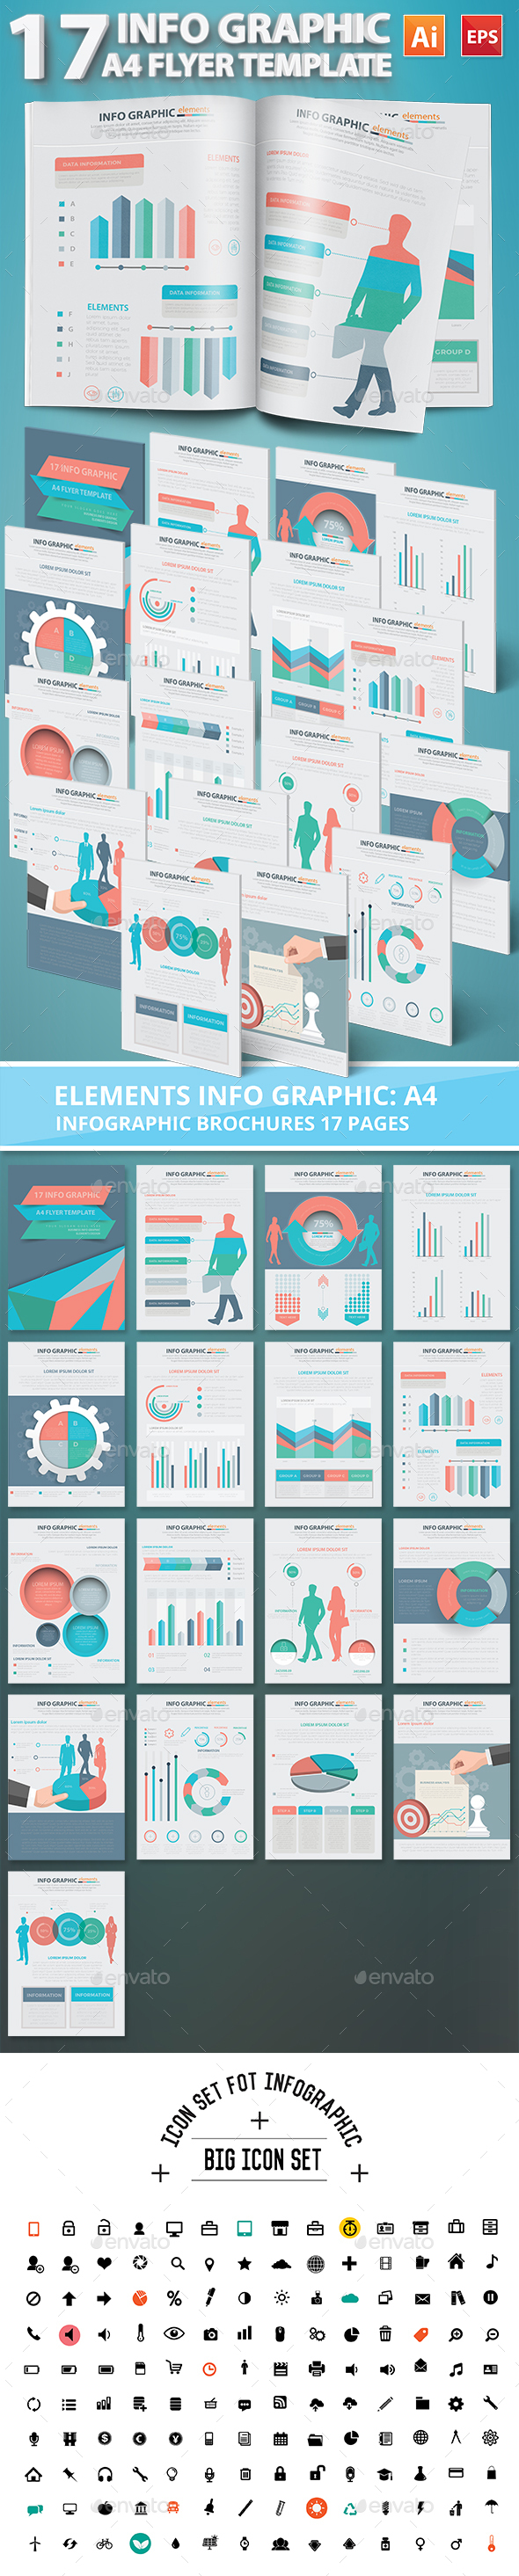 Infographic Elements Design 17 Pages